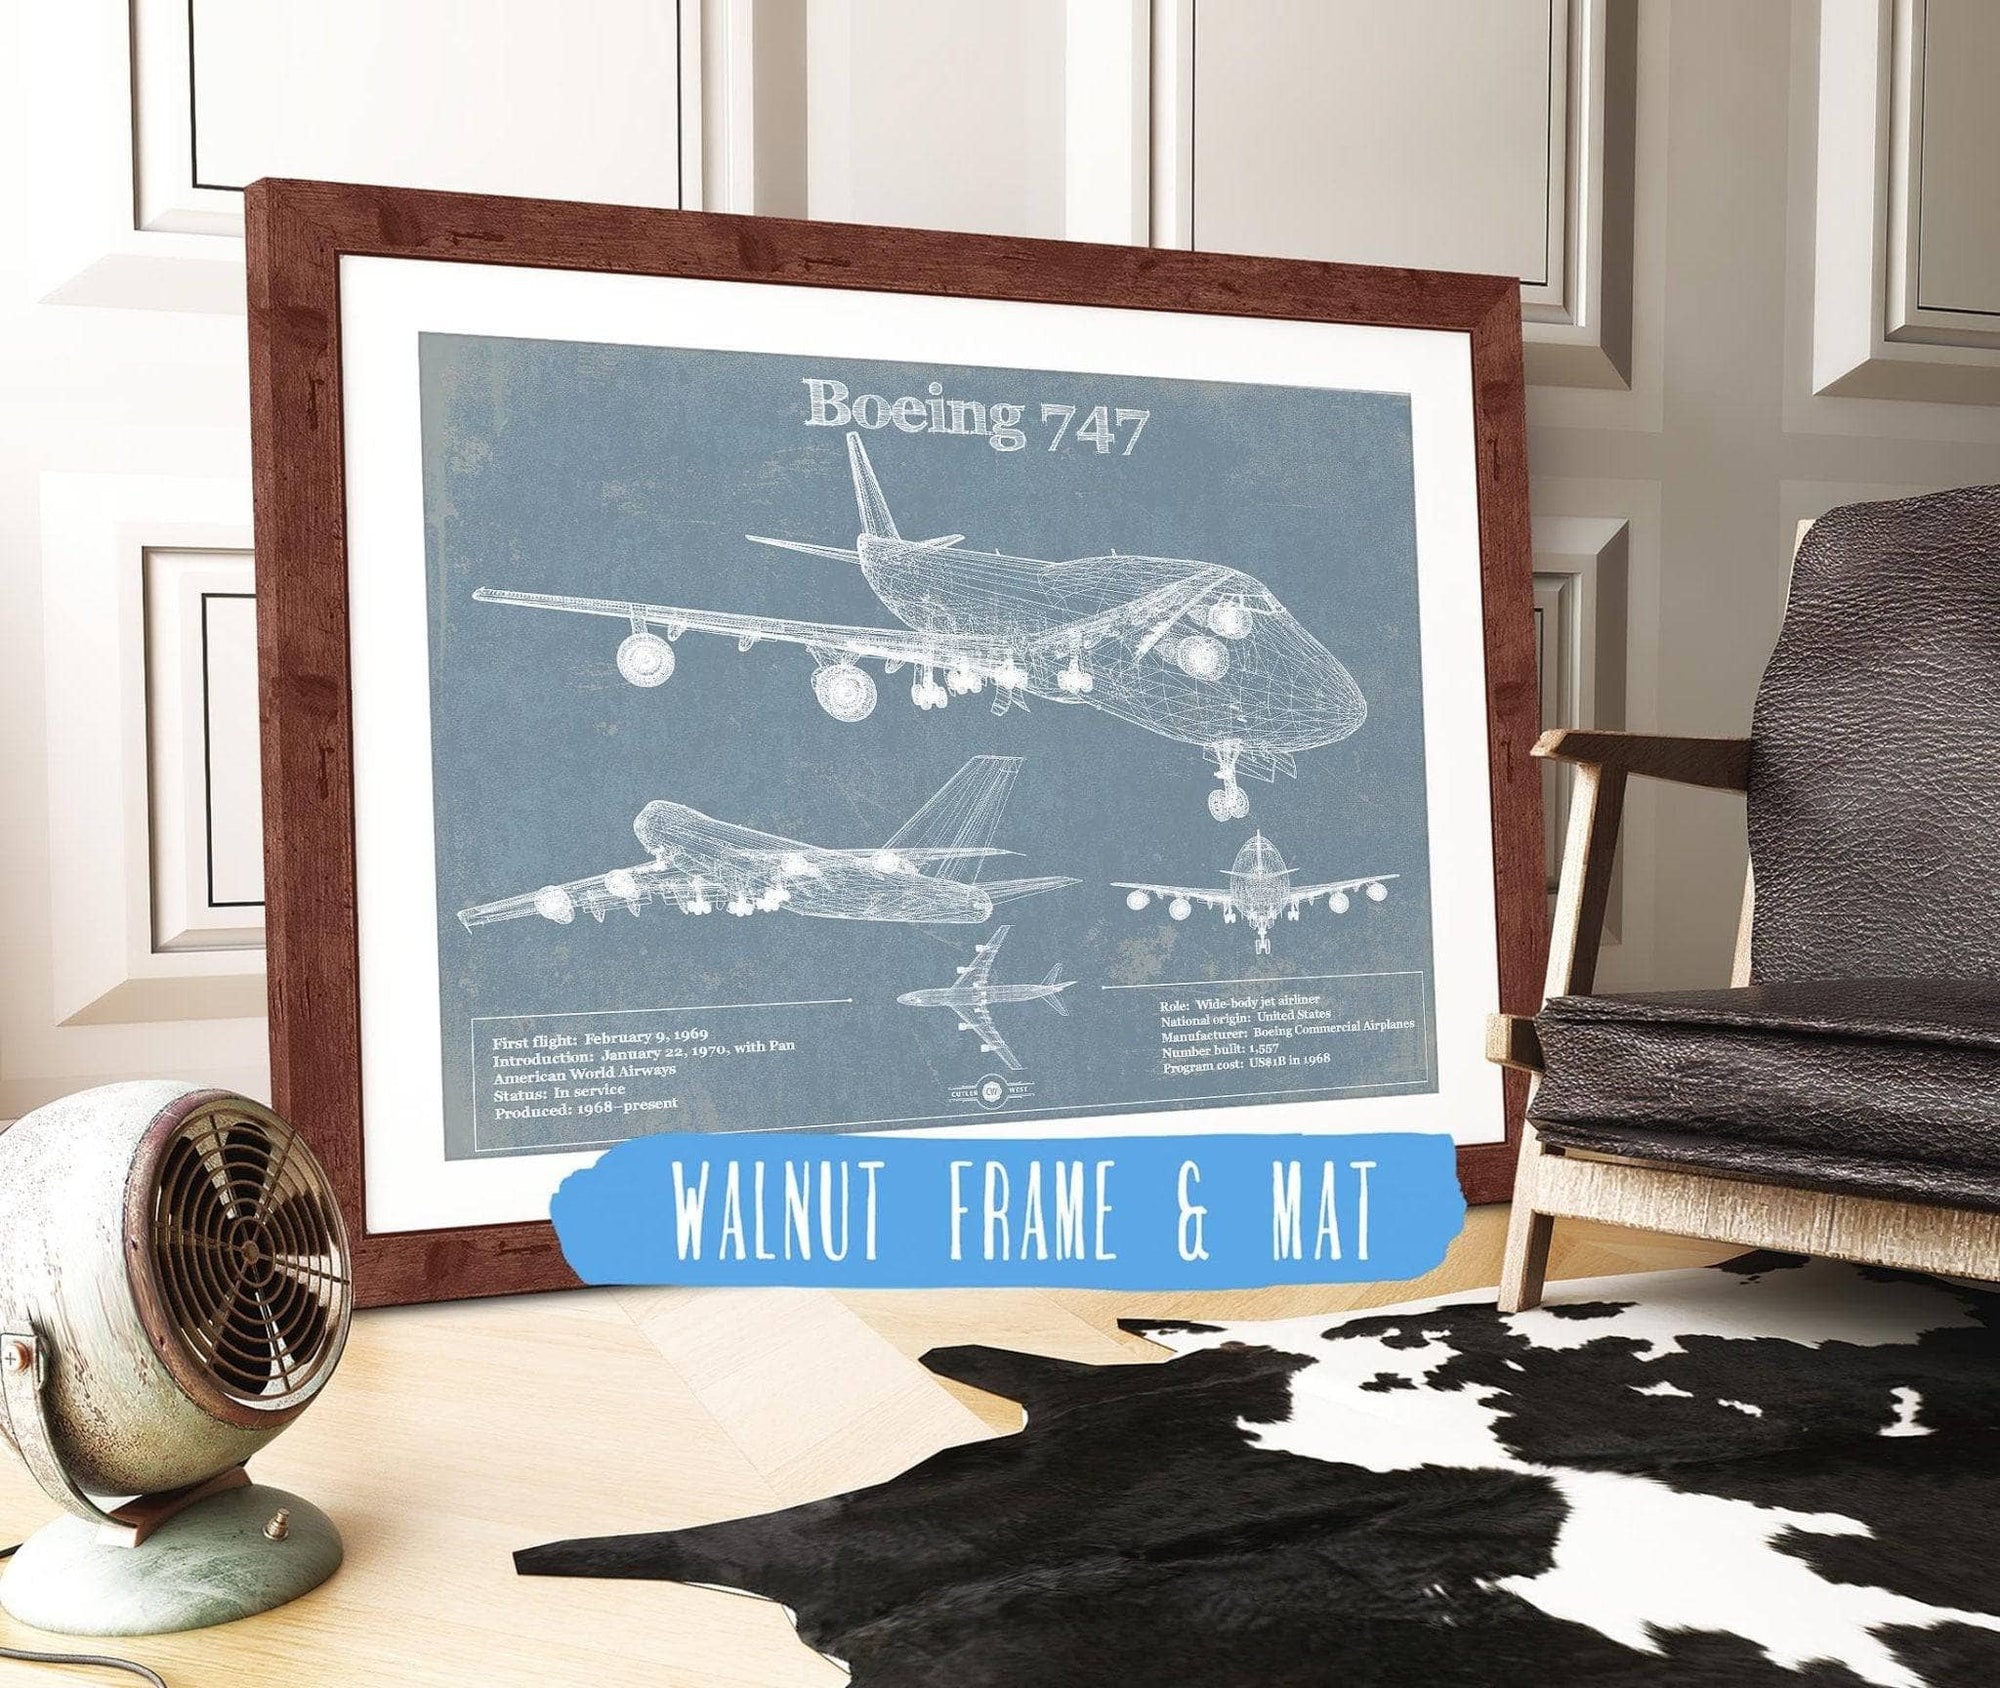 Cutler West Boeing Collection 14" x 11" / Walnut Frame & Mat Boeing 747 Vintage Aviation Blueprint Print - Custom Pilot Name Can Be Added 806363257-TOP